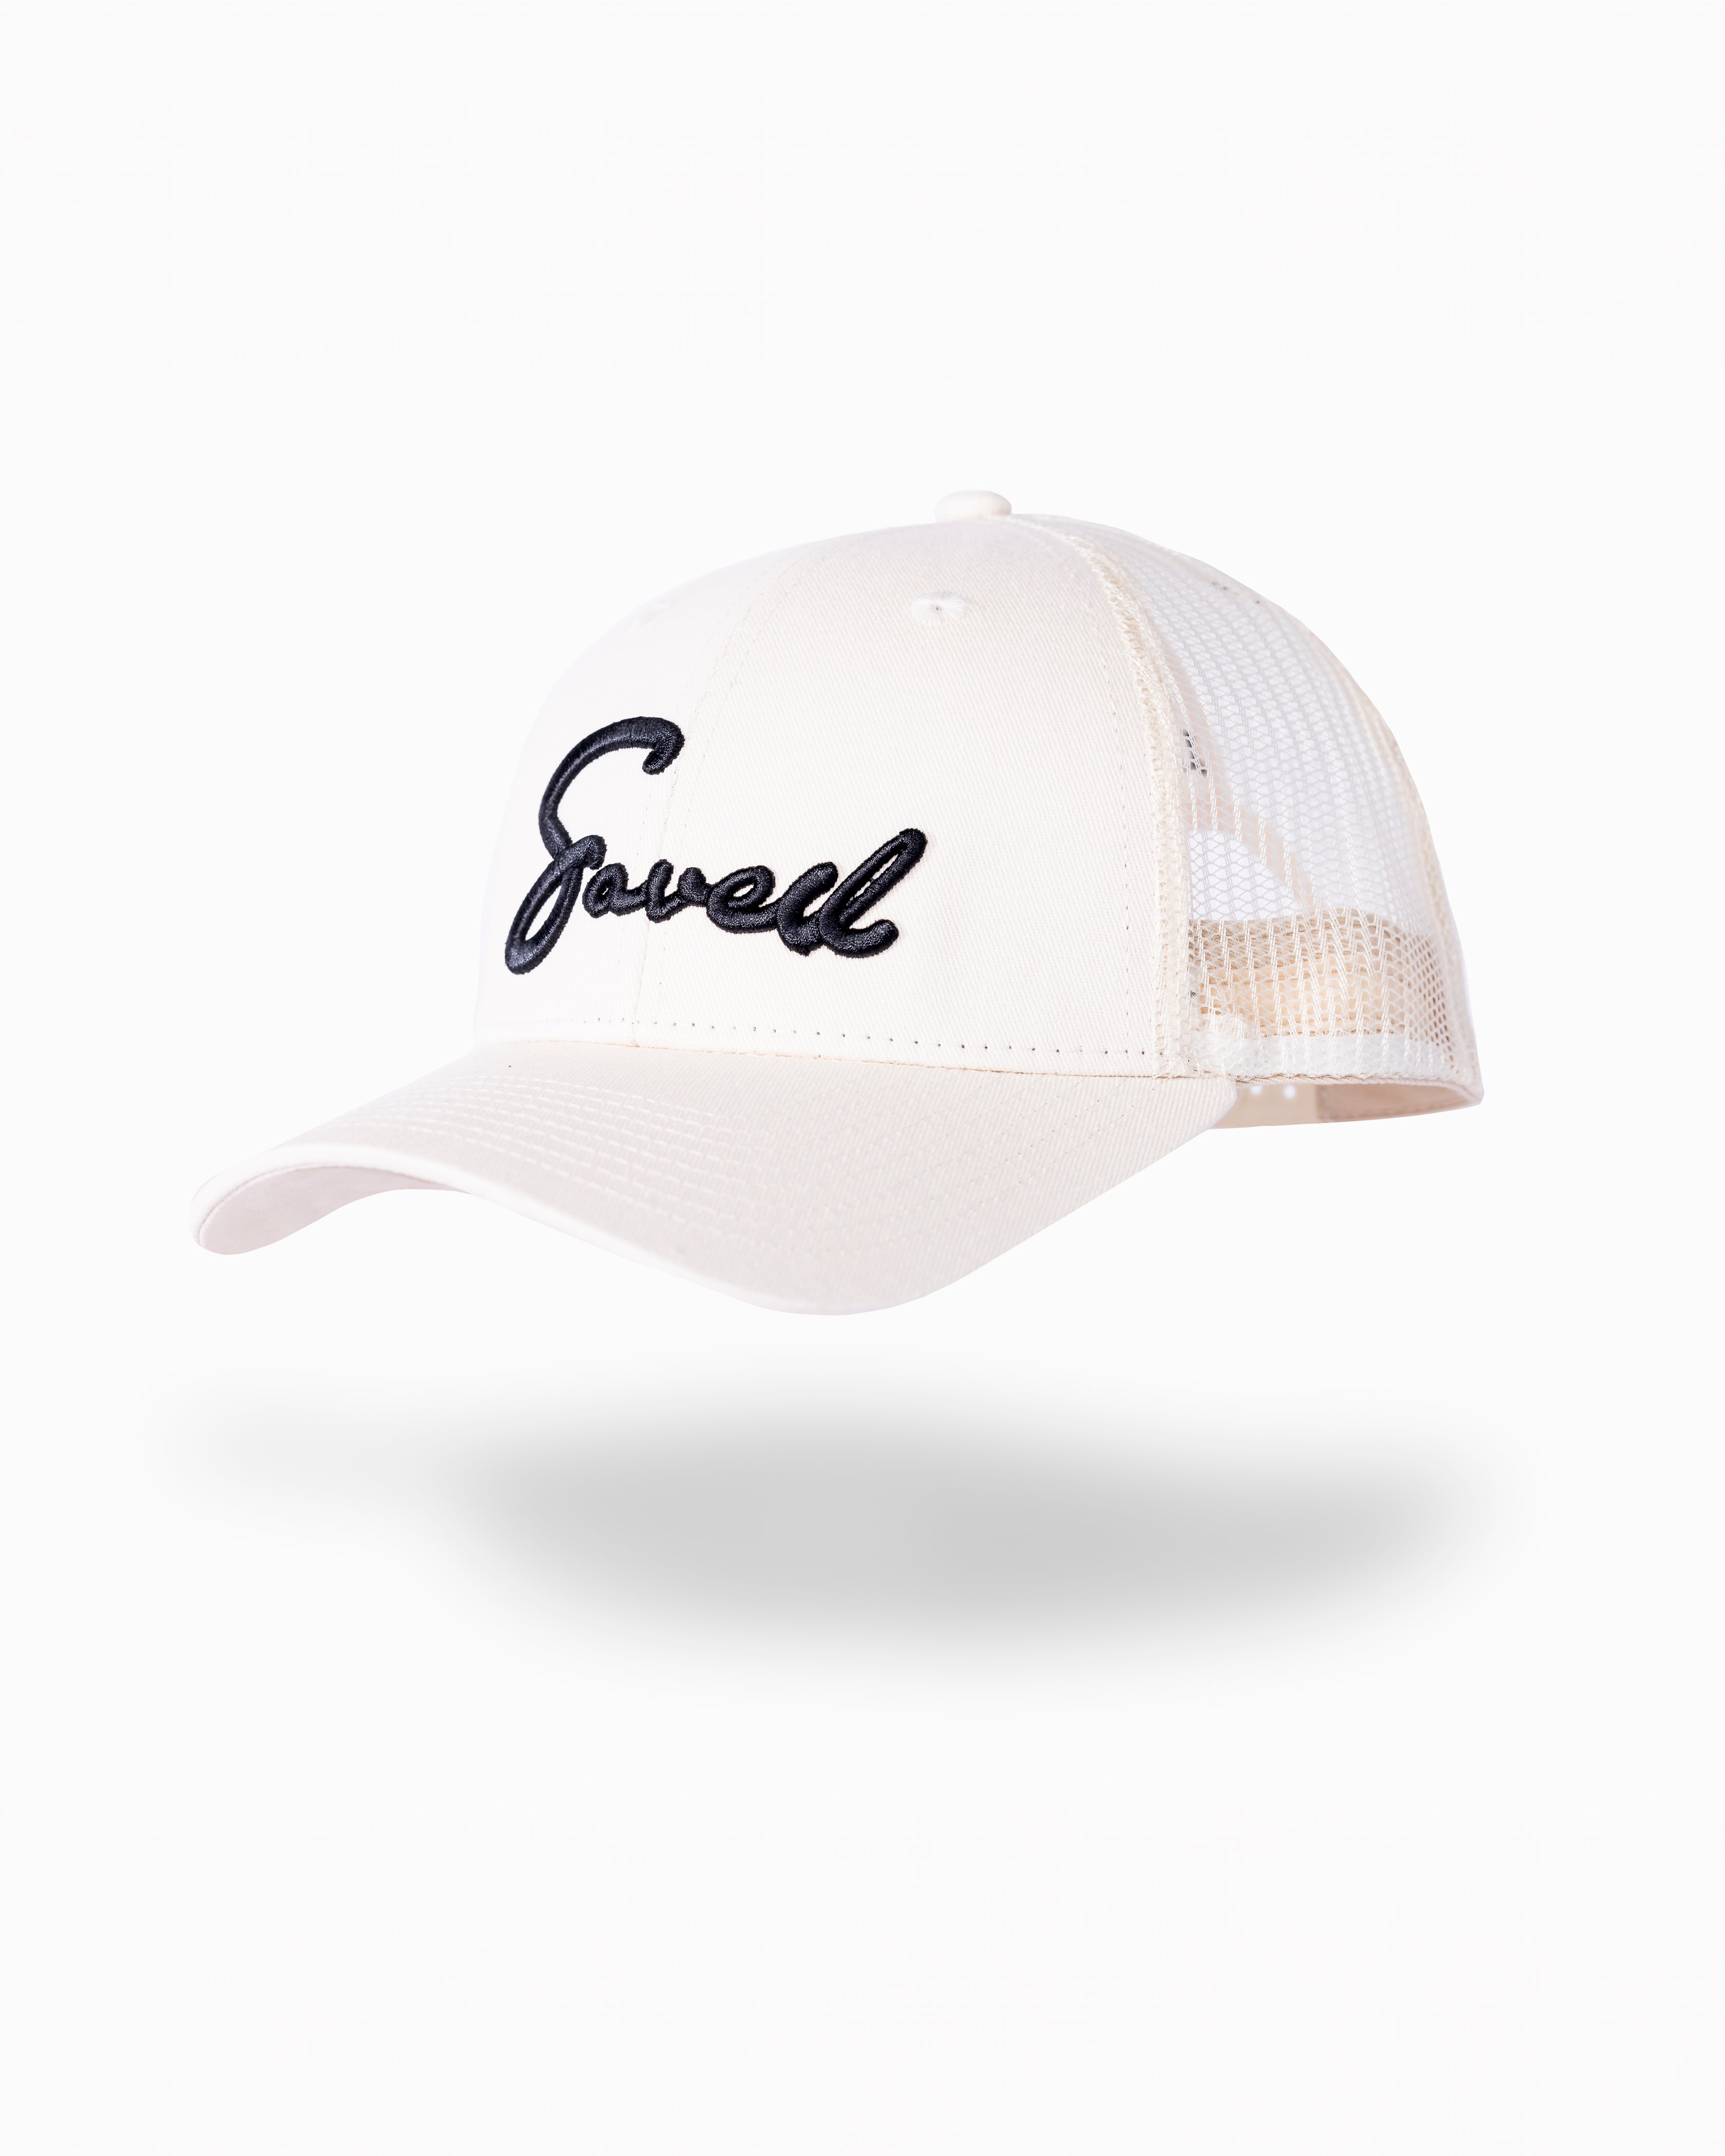 CREAM OF THE CROP SNAP BACK